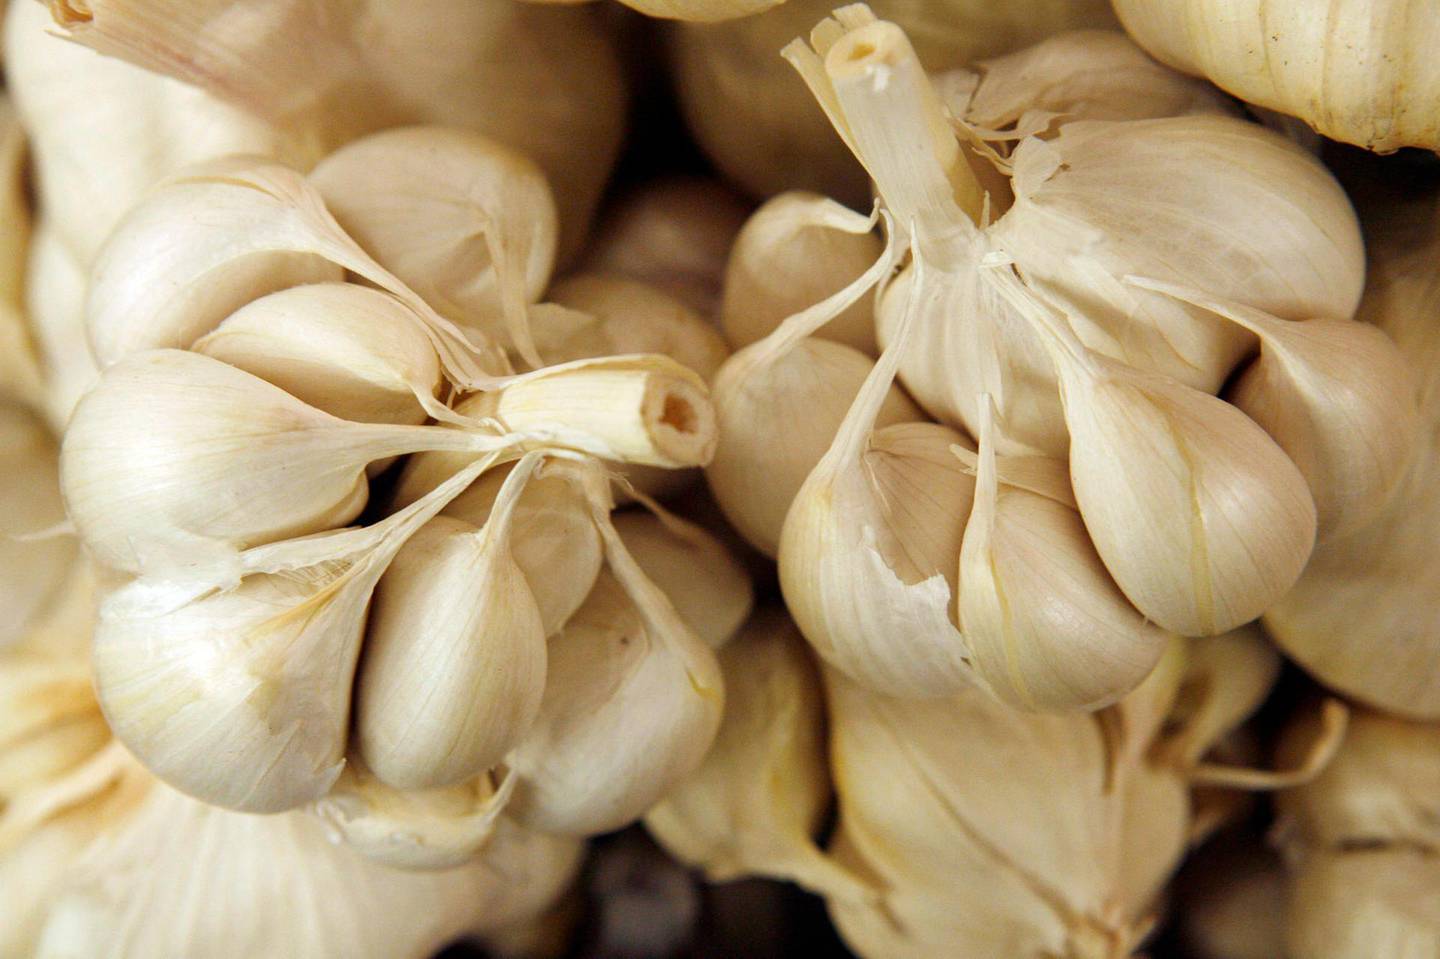 FILE - This Thursday, Feb. 23, 2006 file photo shows garlic bulbs separating into cloves at a store in New York City. On Friday, Feb. 28, 2020, The Associated Press reported on stories circulating online incorrectly asserting that garlic can help the new coronavirus be cured. While garlic does have antimicrobial properties, the World Health Organization said that there is no evidence that eating garlic will prevent the virus. (AP Photo/Kathy Willens)